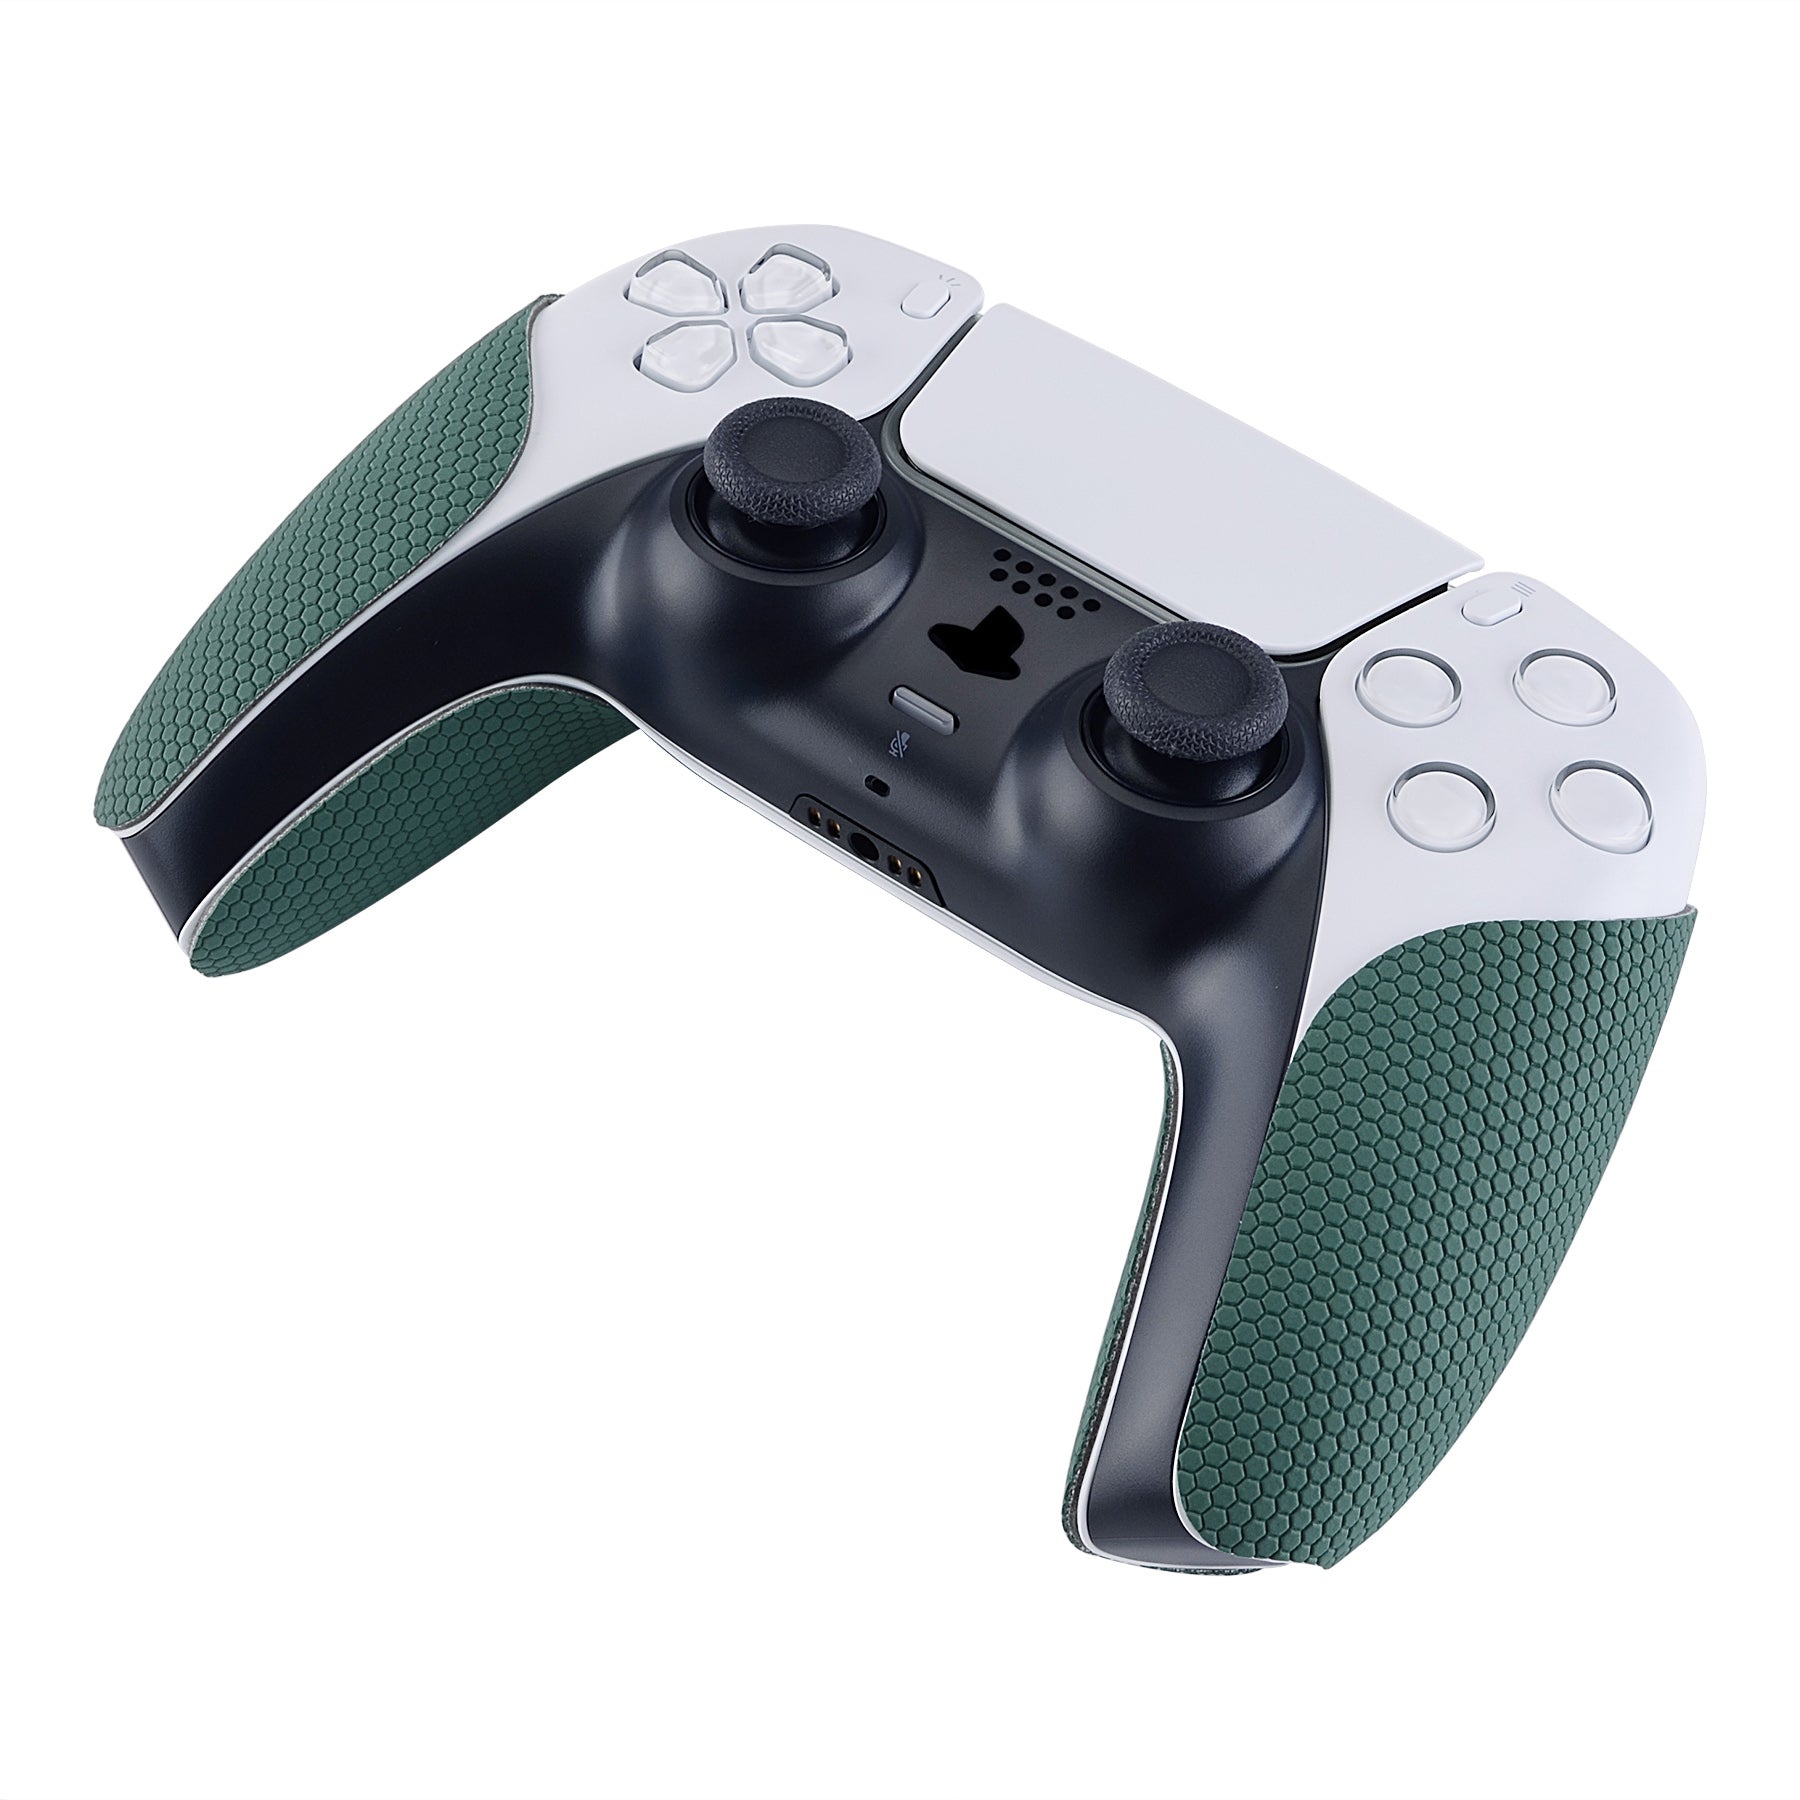 PlayVital Pine Green Anti-Skid Sweat-Absorbent Controller Grip for PS5 Controller, Professional Textured Soft Rubber Pads Handle Grips for PS5 Controller - PFPJ007 PlayVital